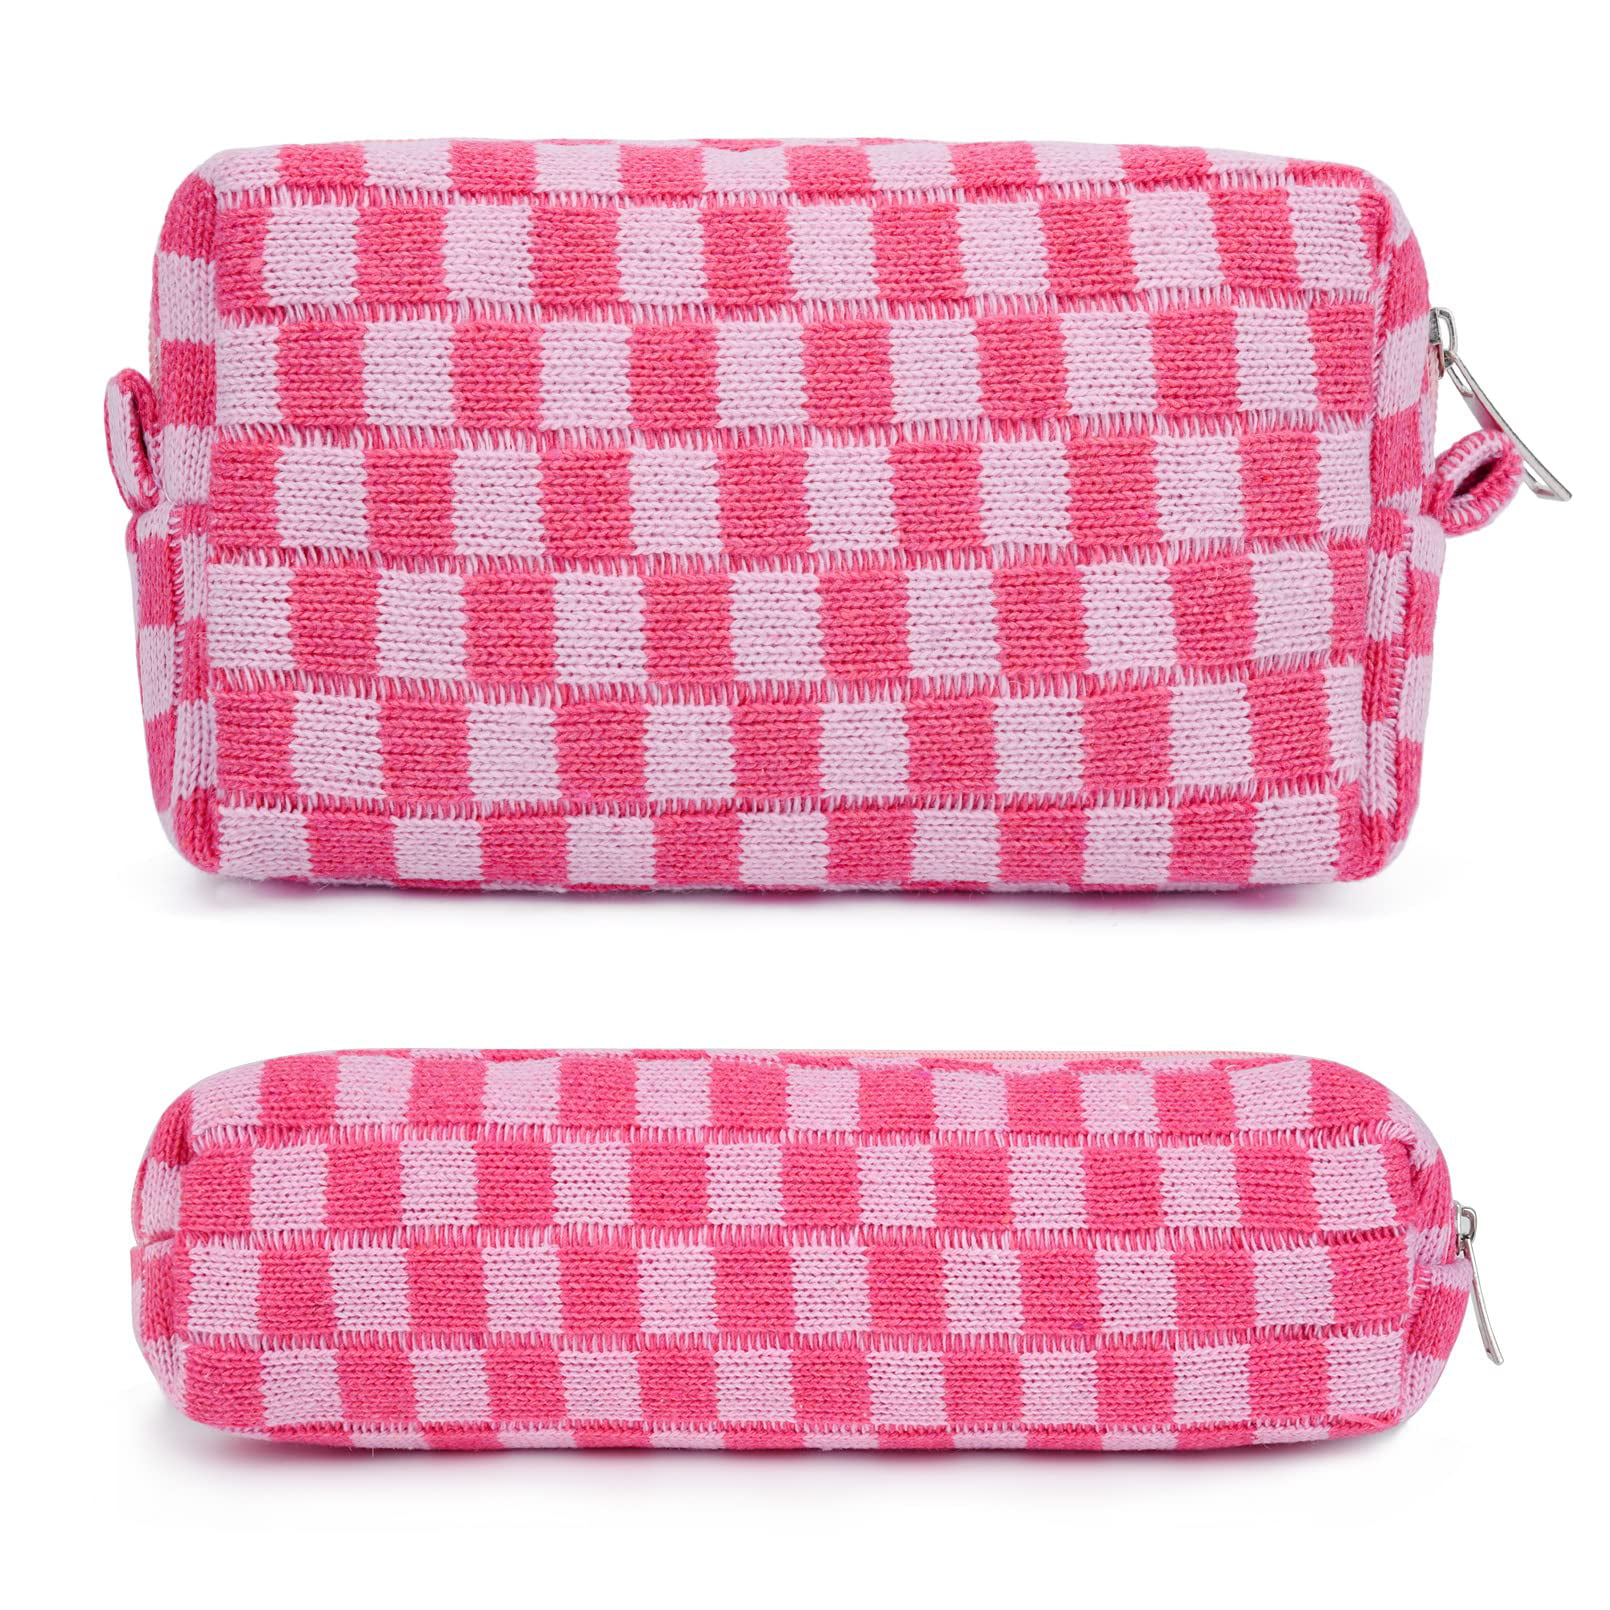 SOIDRAM 2 Pieces Makeup Bag Large Checkered Cosmetic Bag Blue Capacity  Canvas Travel Toiletry Bag Organizer Cute Makeup Brushes Aesthetic  Accessories